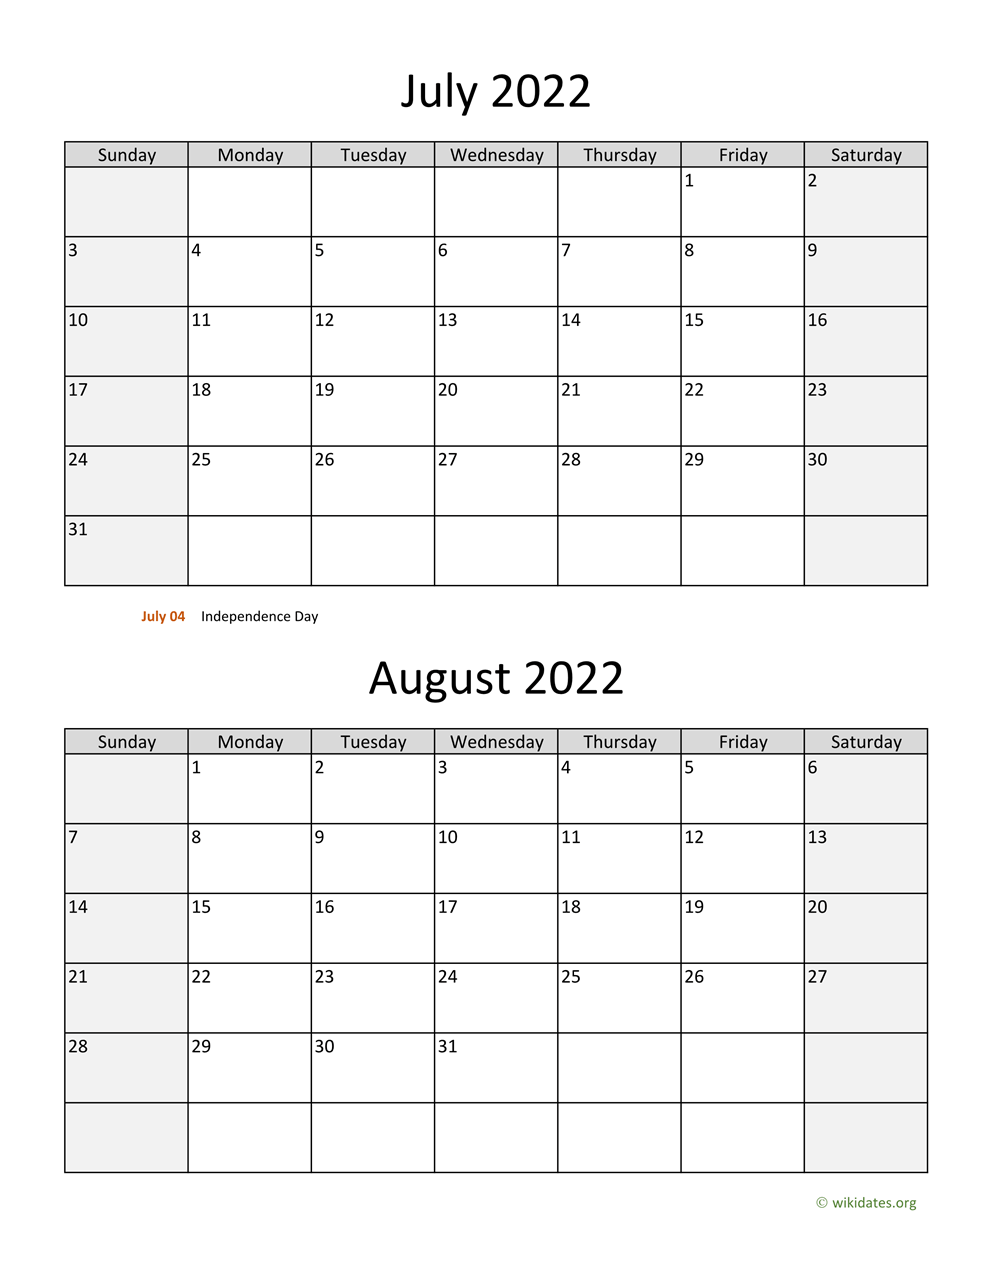 June July And August 2022 Calendar July And August 2022 Calendar | Wikidates.org